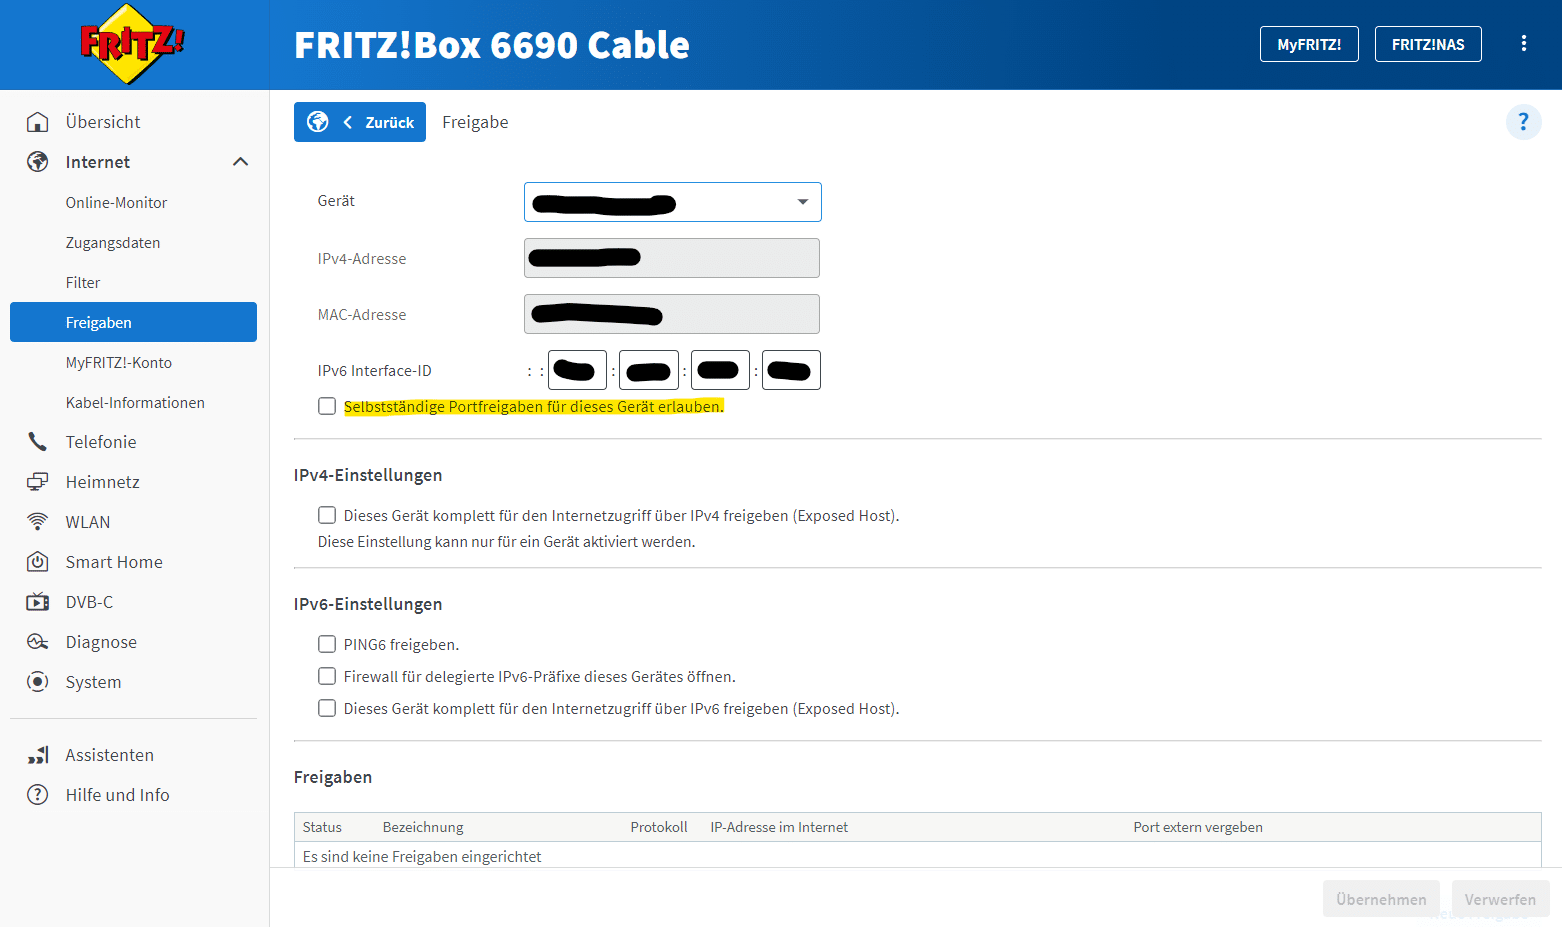 FRITZ!Box user interface with port share settings